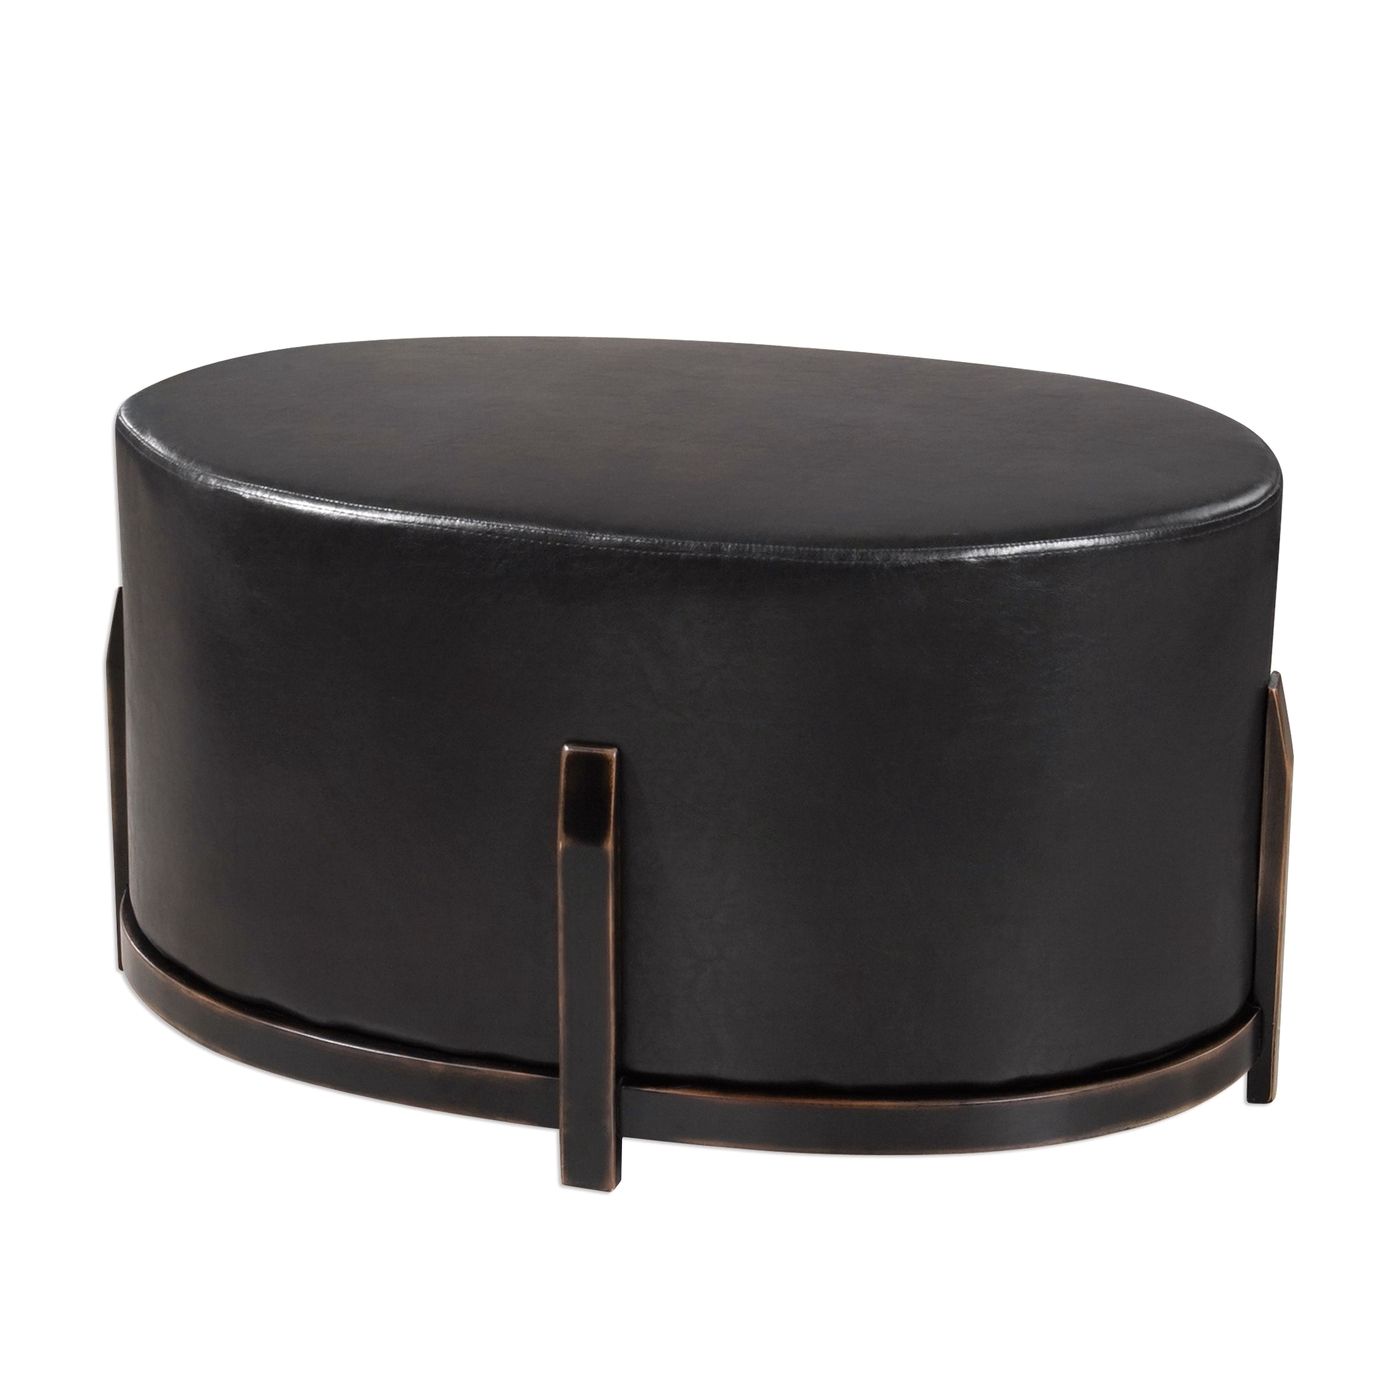 Desta Cushioned Espresso Brown Faux Leather Ottoman With Black Wood Frame Inside Black Leather Ottomans (View 18 of 20)